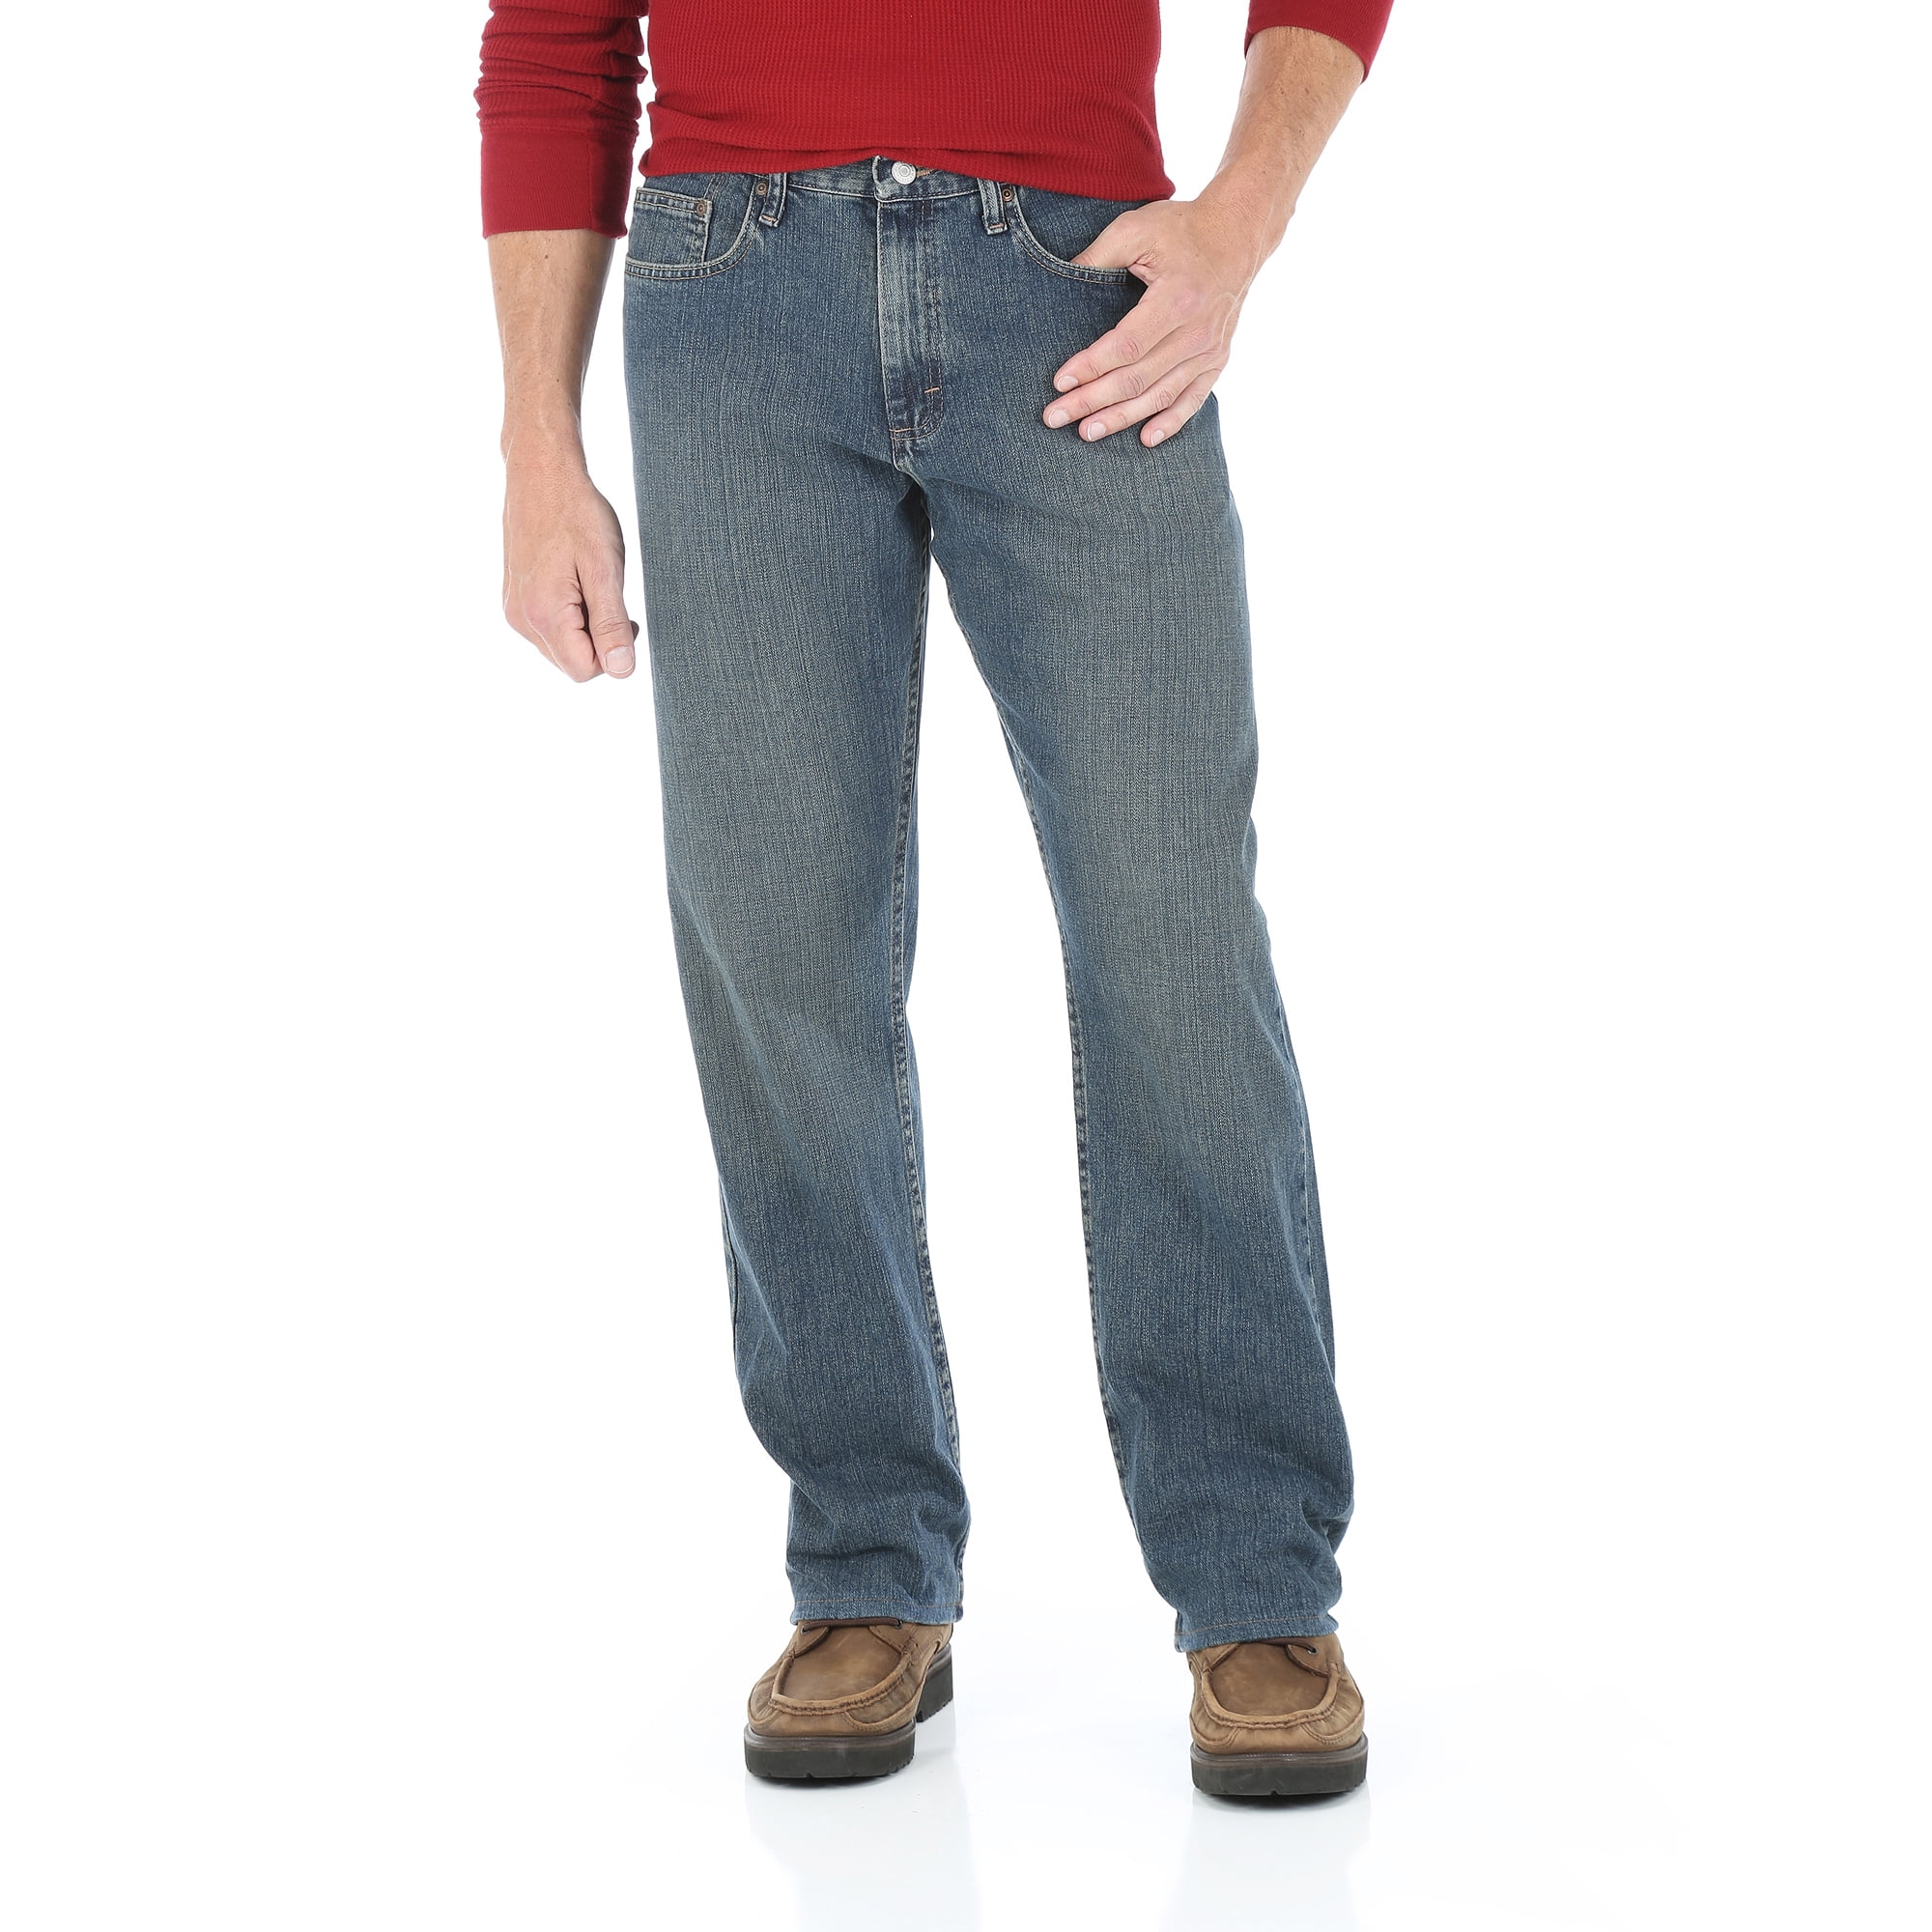 Men's Relaxed Straight Fit Jeans - Walmart.com